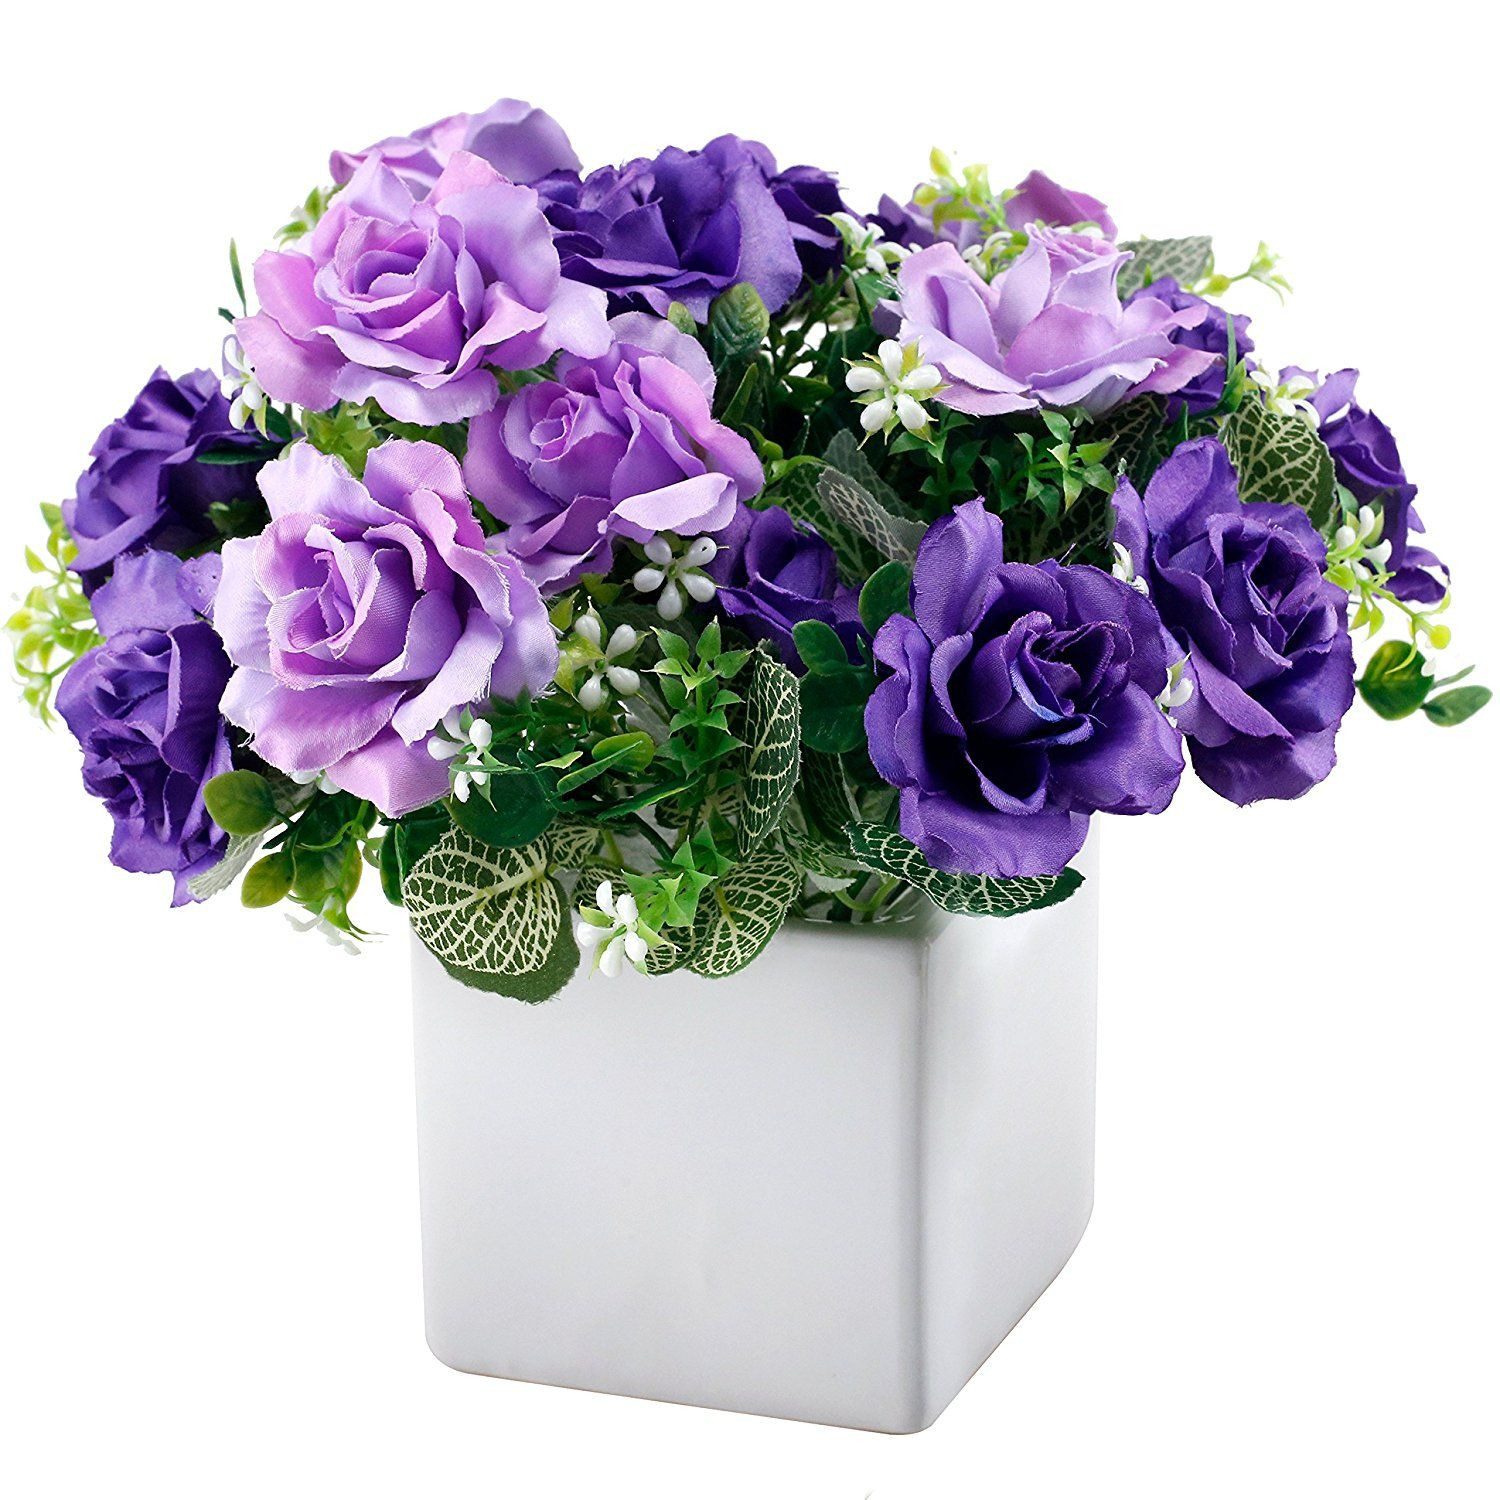 27 Great Vase with White Roses 2024 free download vase with white roses of artificial purple rose flower arrangement in 4 inch square white with artificial purple rose flower arrangement in 4 inch square white ceramic vase learn